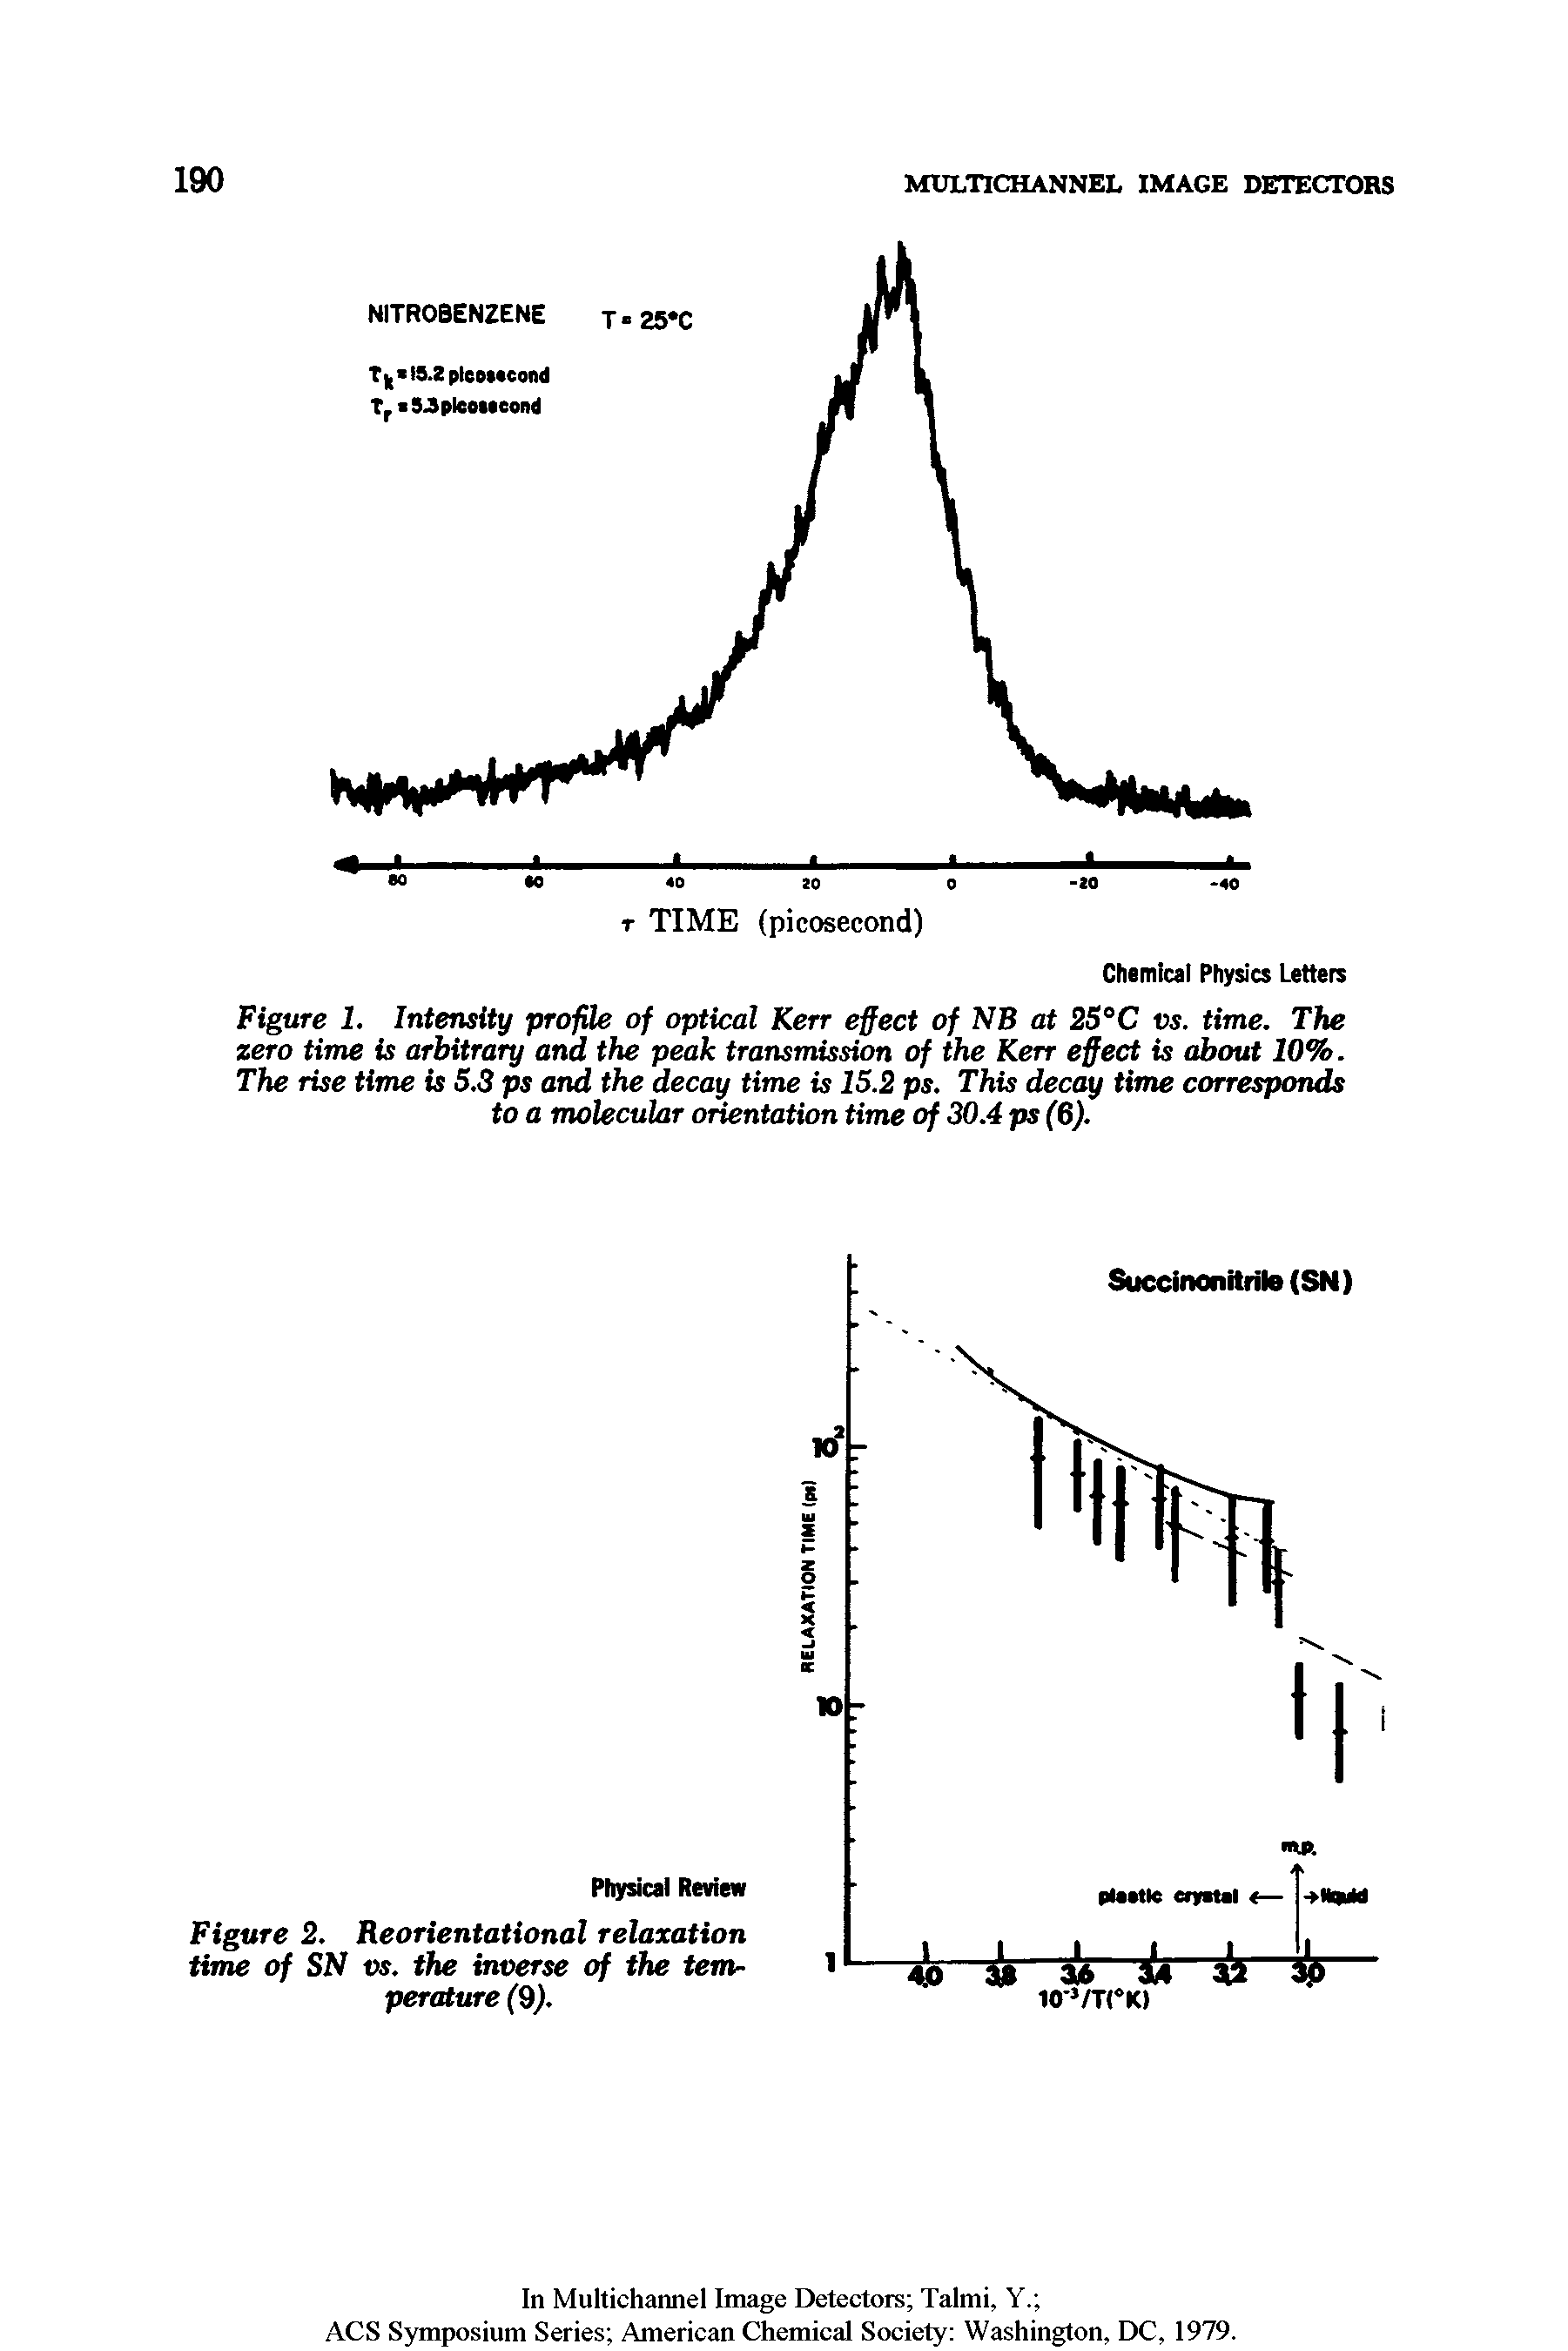 Figure 1. Intensity profile of optical Kerr effect of NB at 25°C vs. time. The zero time is arbitrary and the peak transmission of the Kerr effect is about 10%. The rise time is 5.3 ps and the decay time is 15.2 ps. This decay time corresponds to a molecular orientation time of 30.4 ps (6).